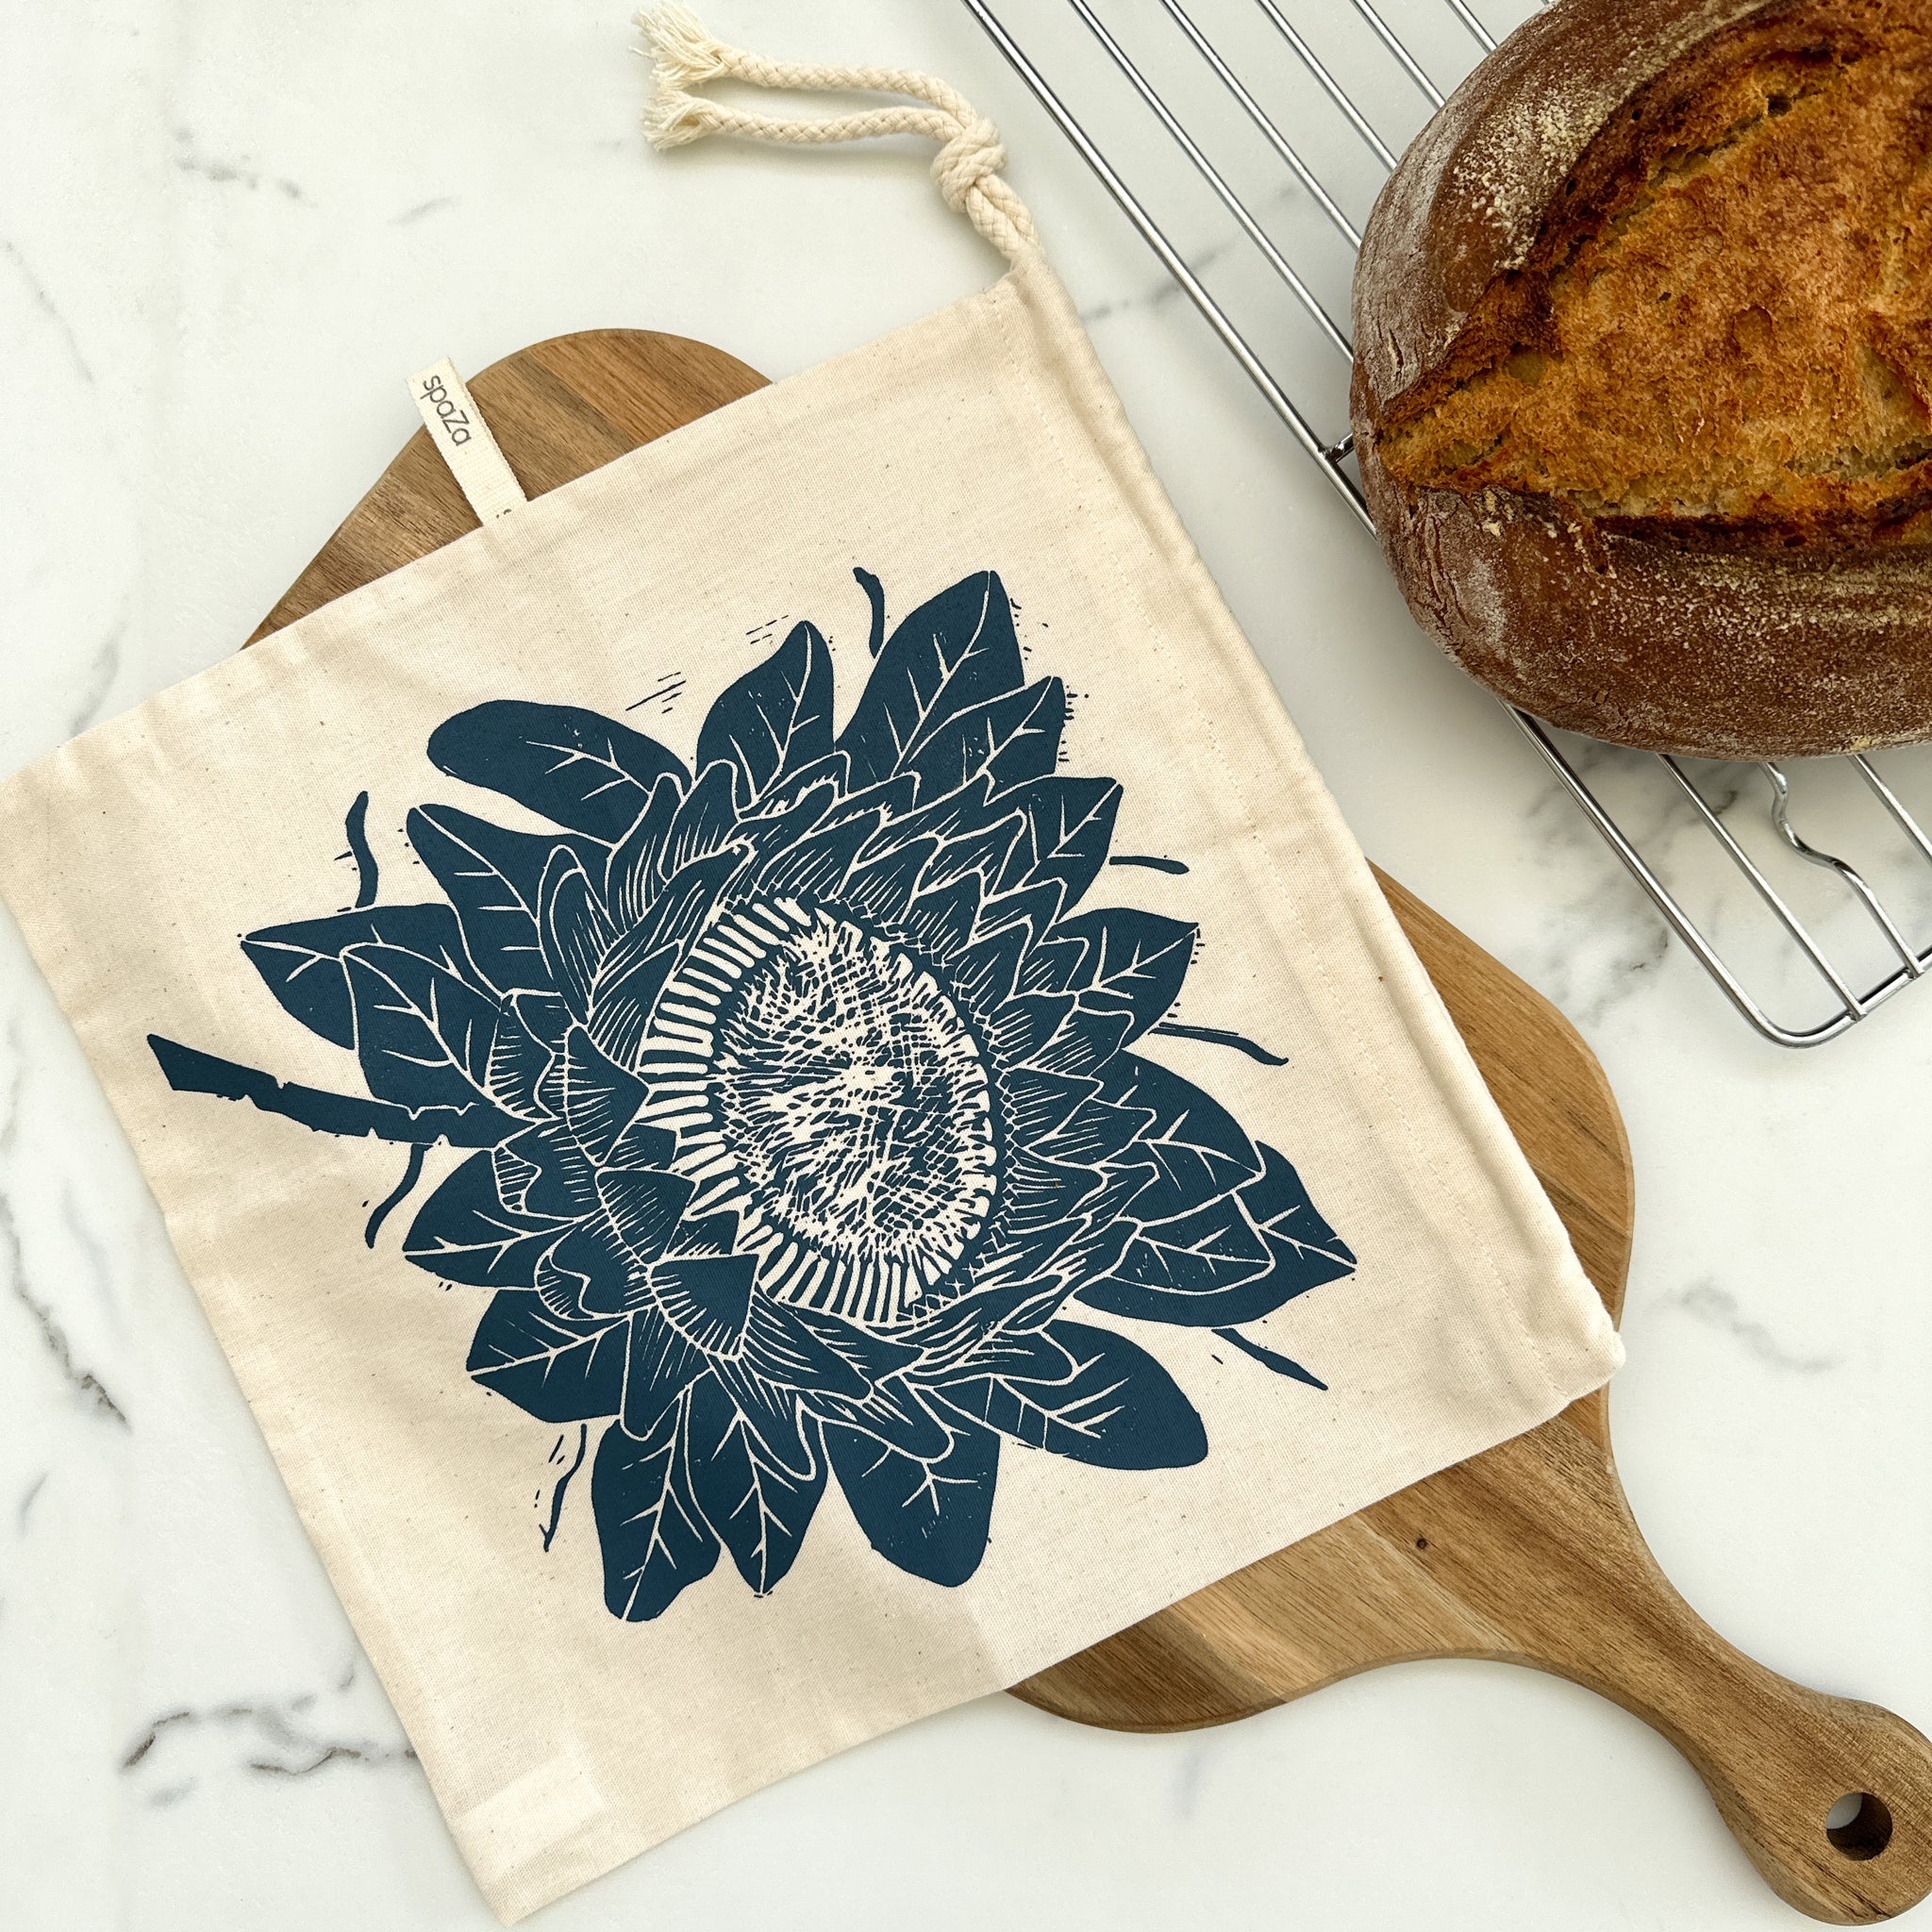 Bread Bag 11.5" square for round loaves organic cotton protea motif